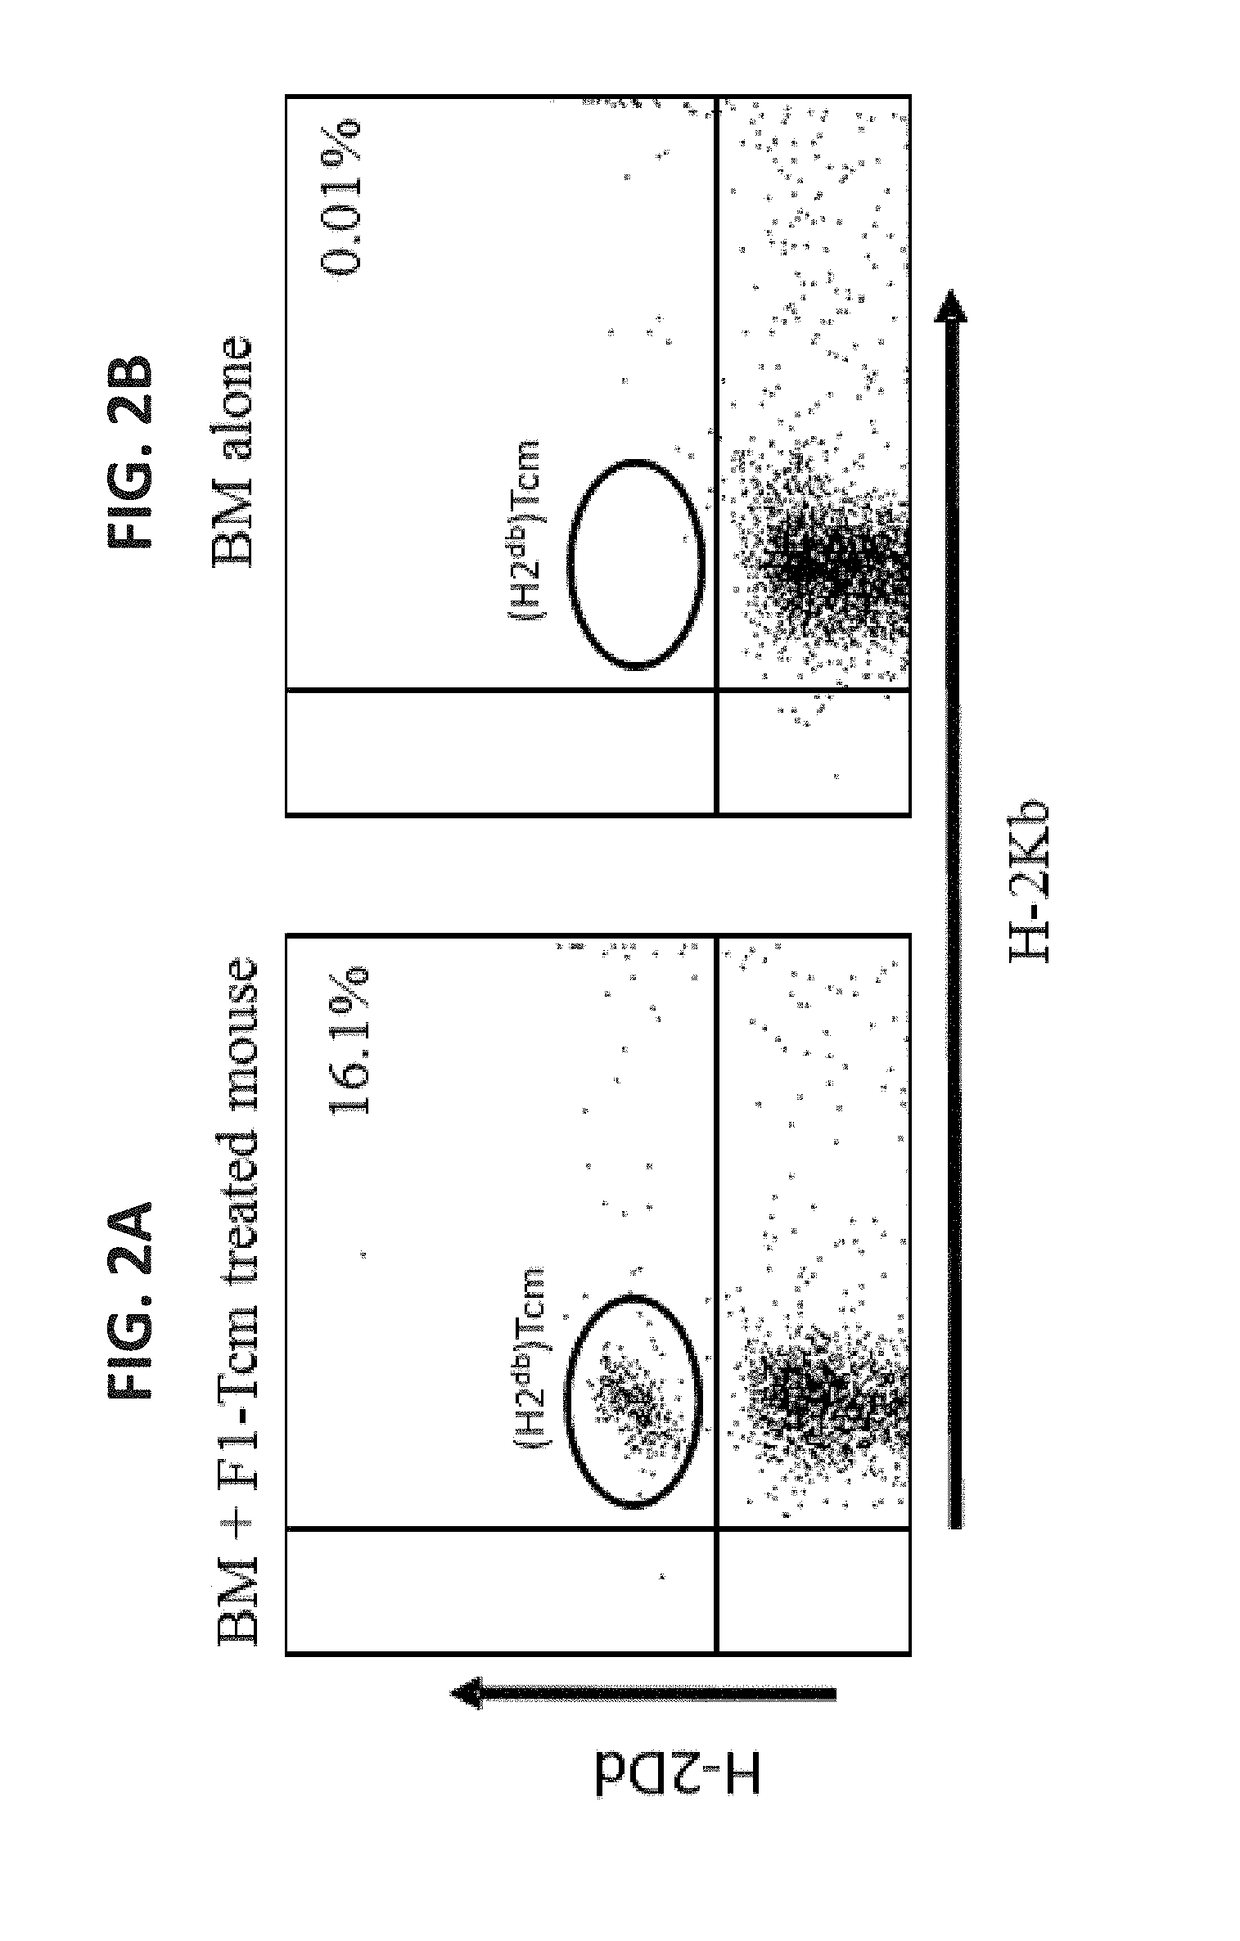 Genetically modified Anti-third party central memory t cells and use of same in immunotherapy